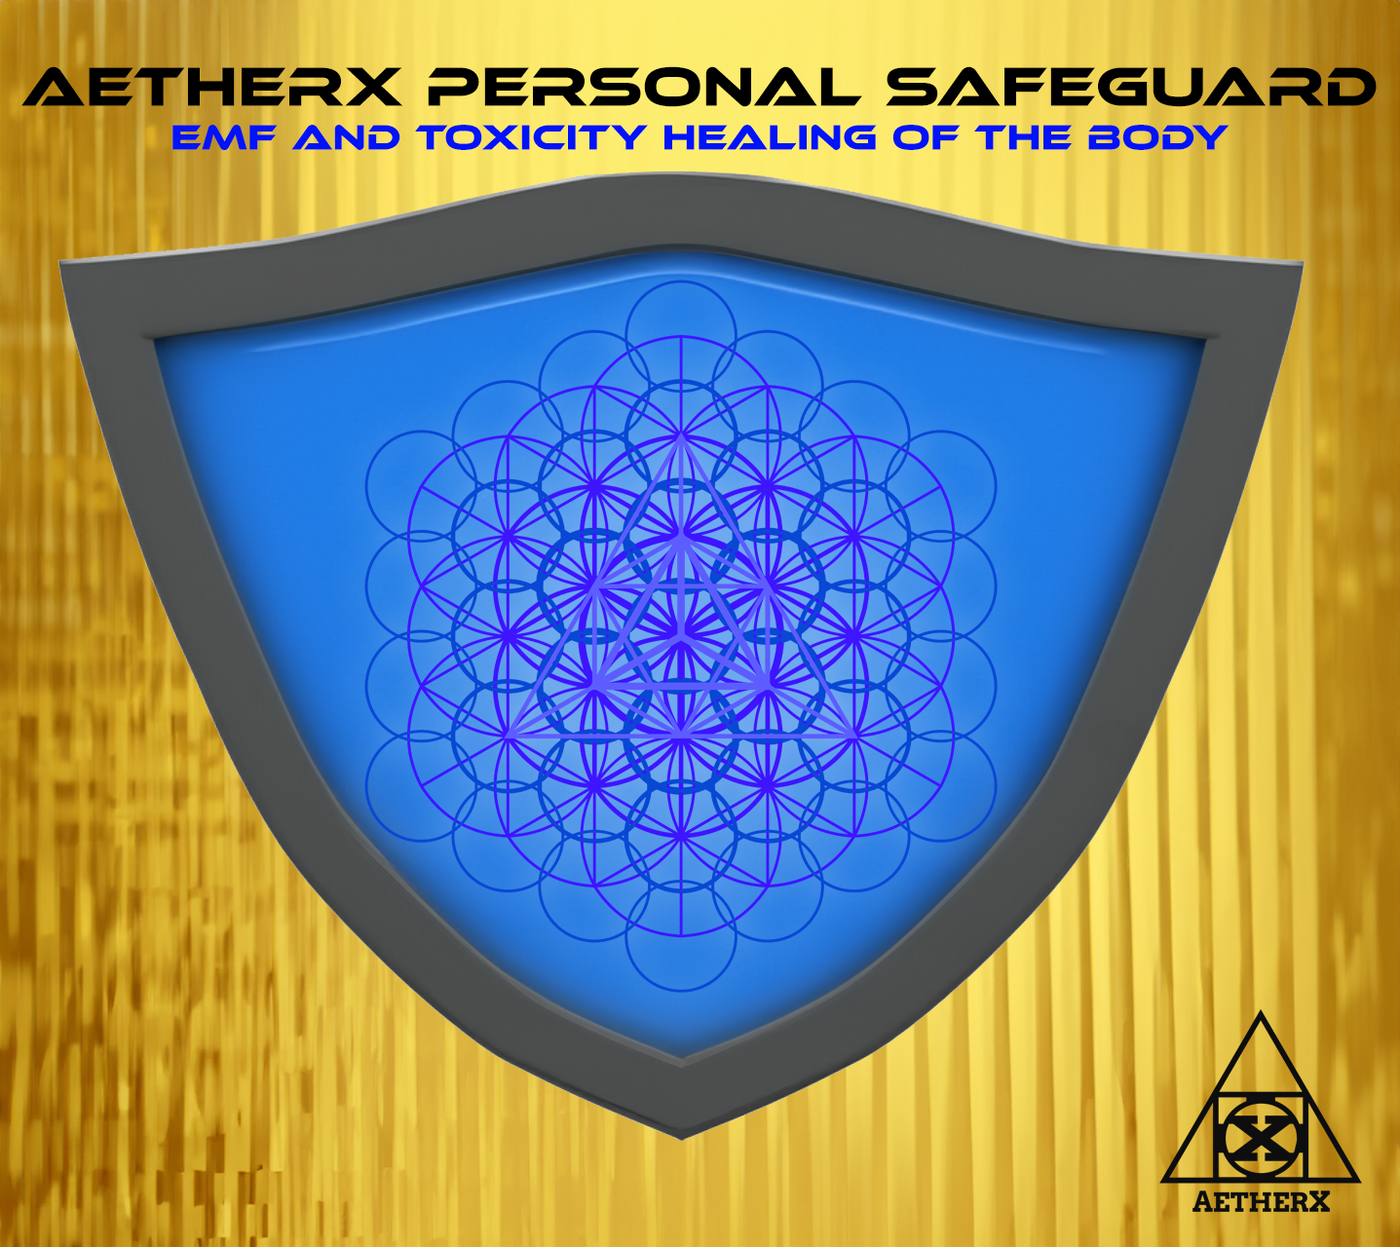 Personal Safeguard Image Package